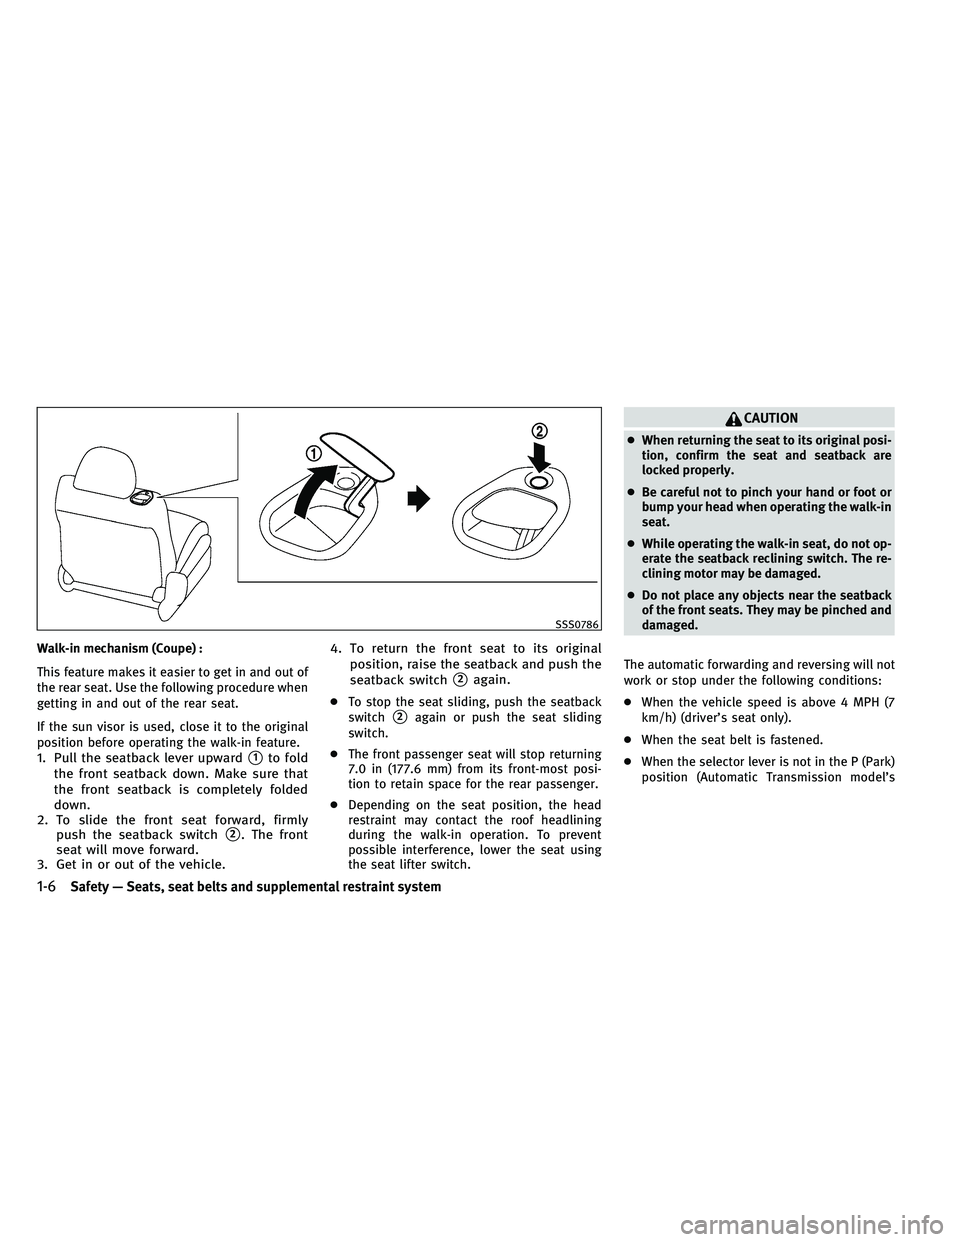 INFINITI G-COUPE 2011  Owners Manual Walk-in mechanism (Coupe) :
This feature makes it easier to get in and out of
the rear seat. Use the following procedure when
getting in and out of the rear seat.
If the sun visor is used, close it to